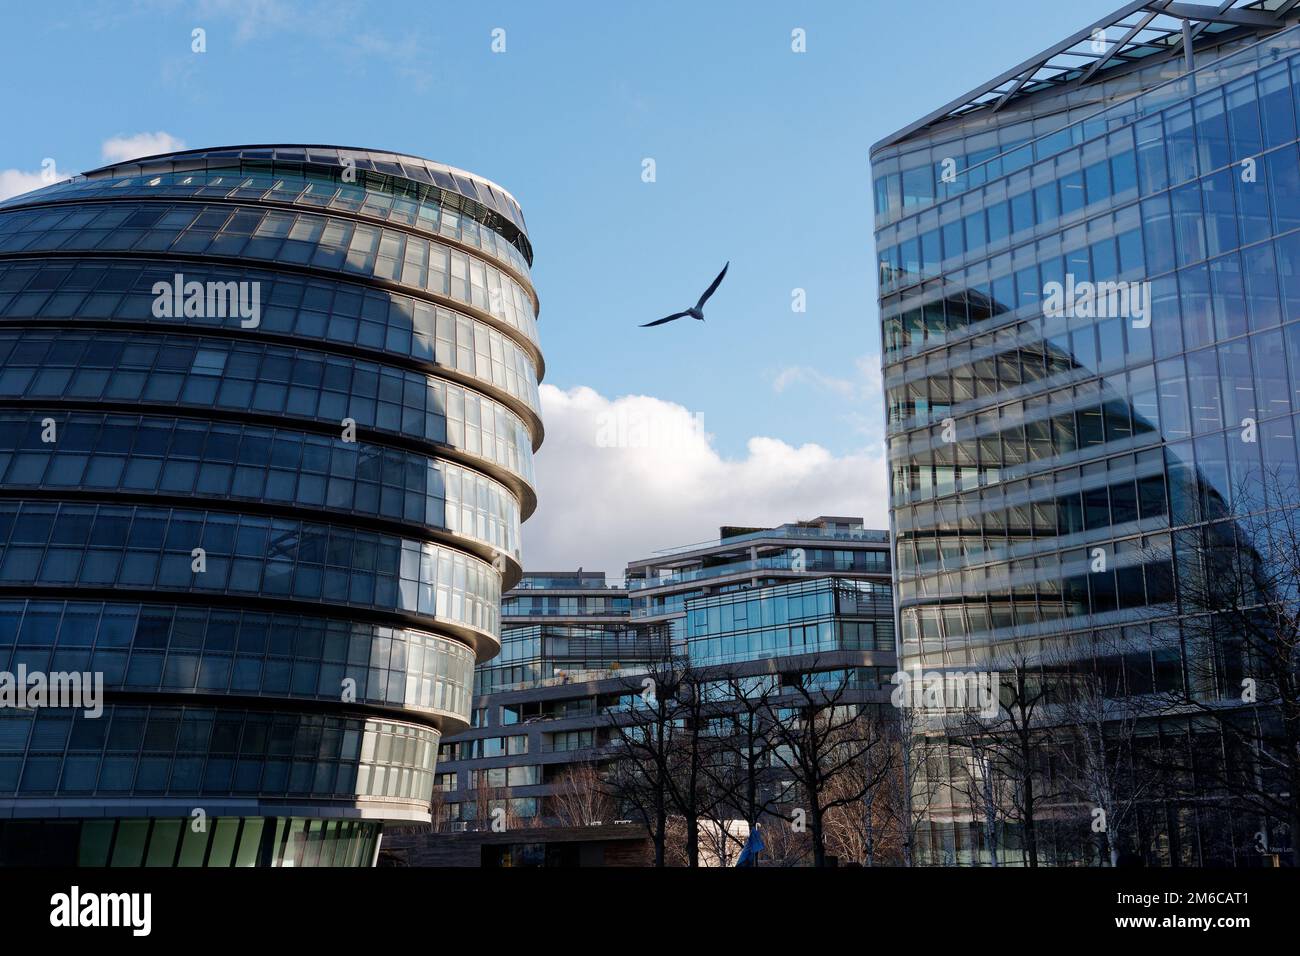 A bird flies between City Hall and other modern buildings, London, England Stock Photo